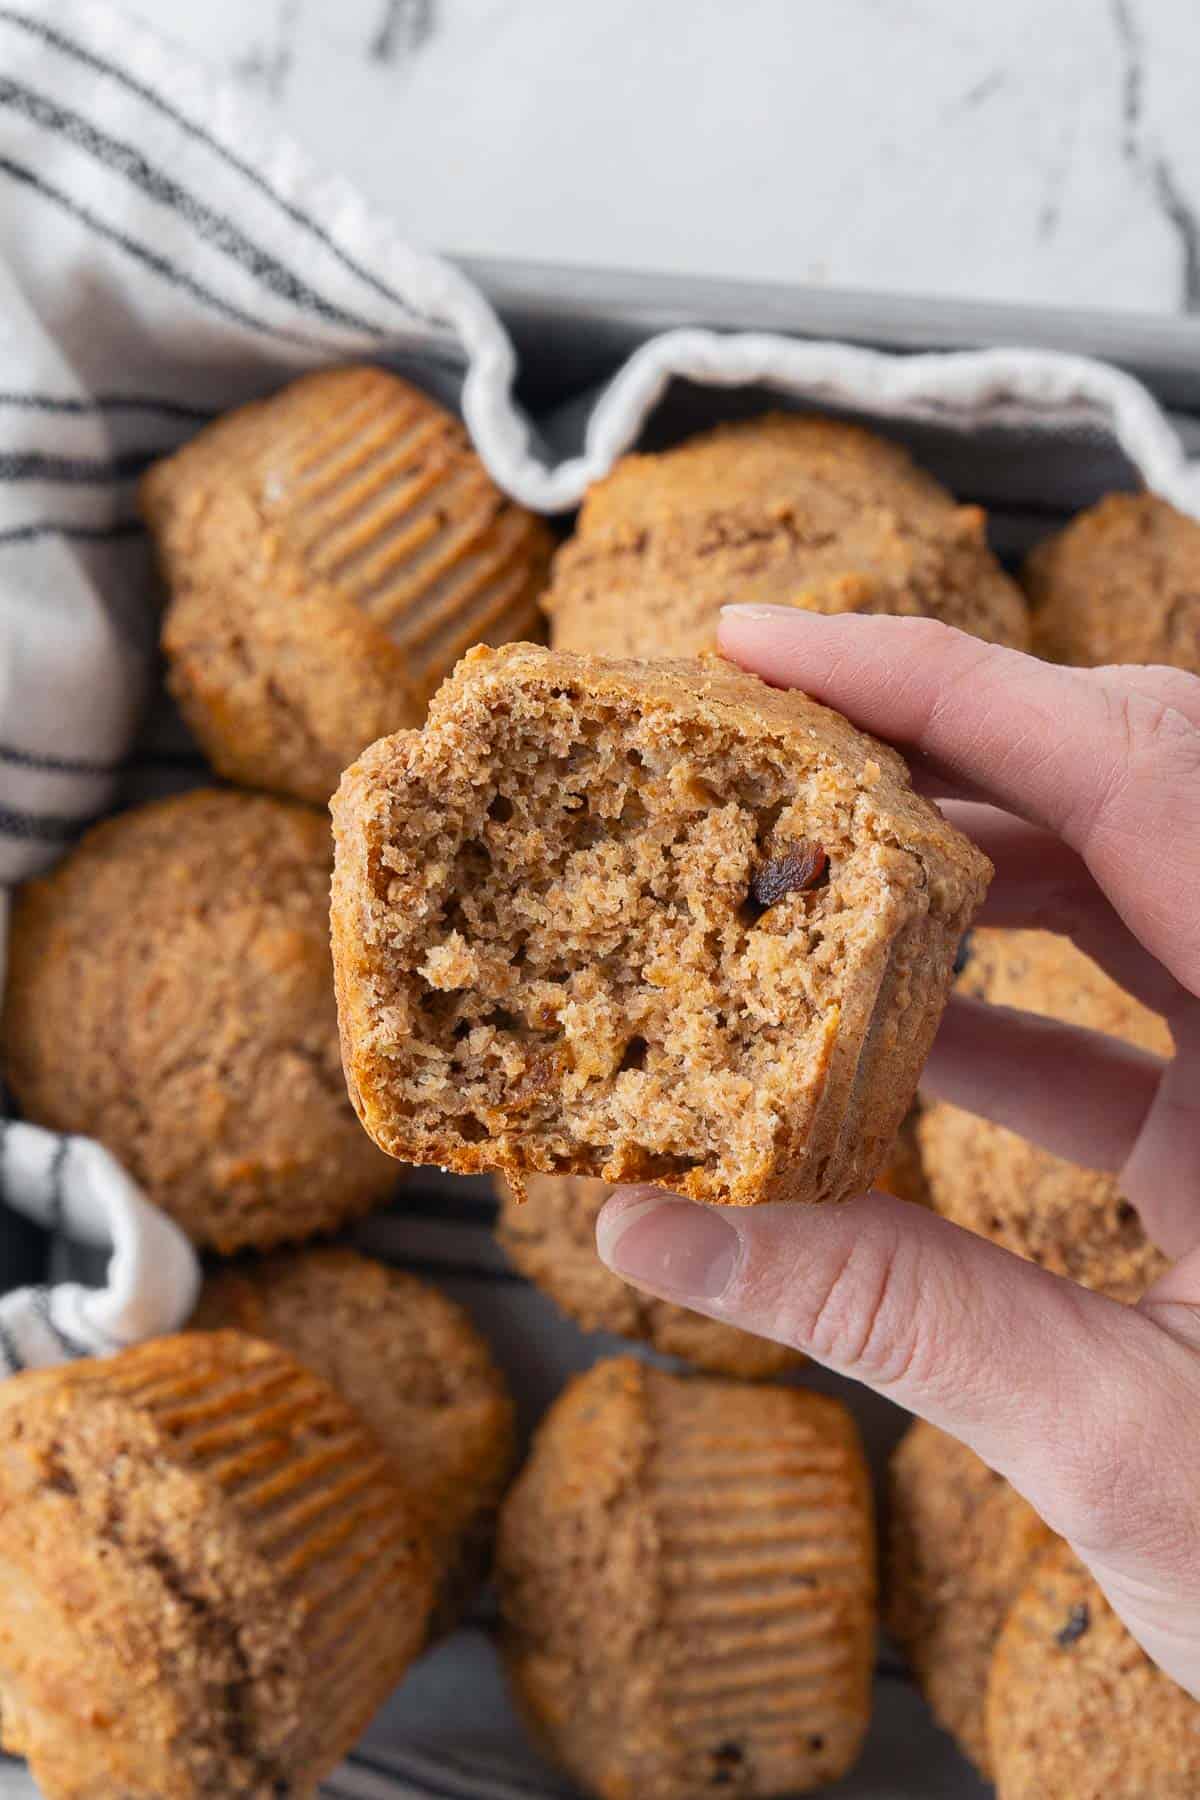 Hand holding a bran muffin over more muffins with a bite taken out to show inside texture.